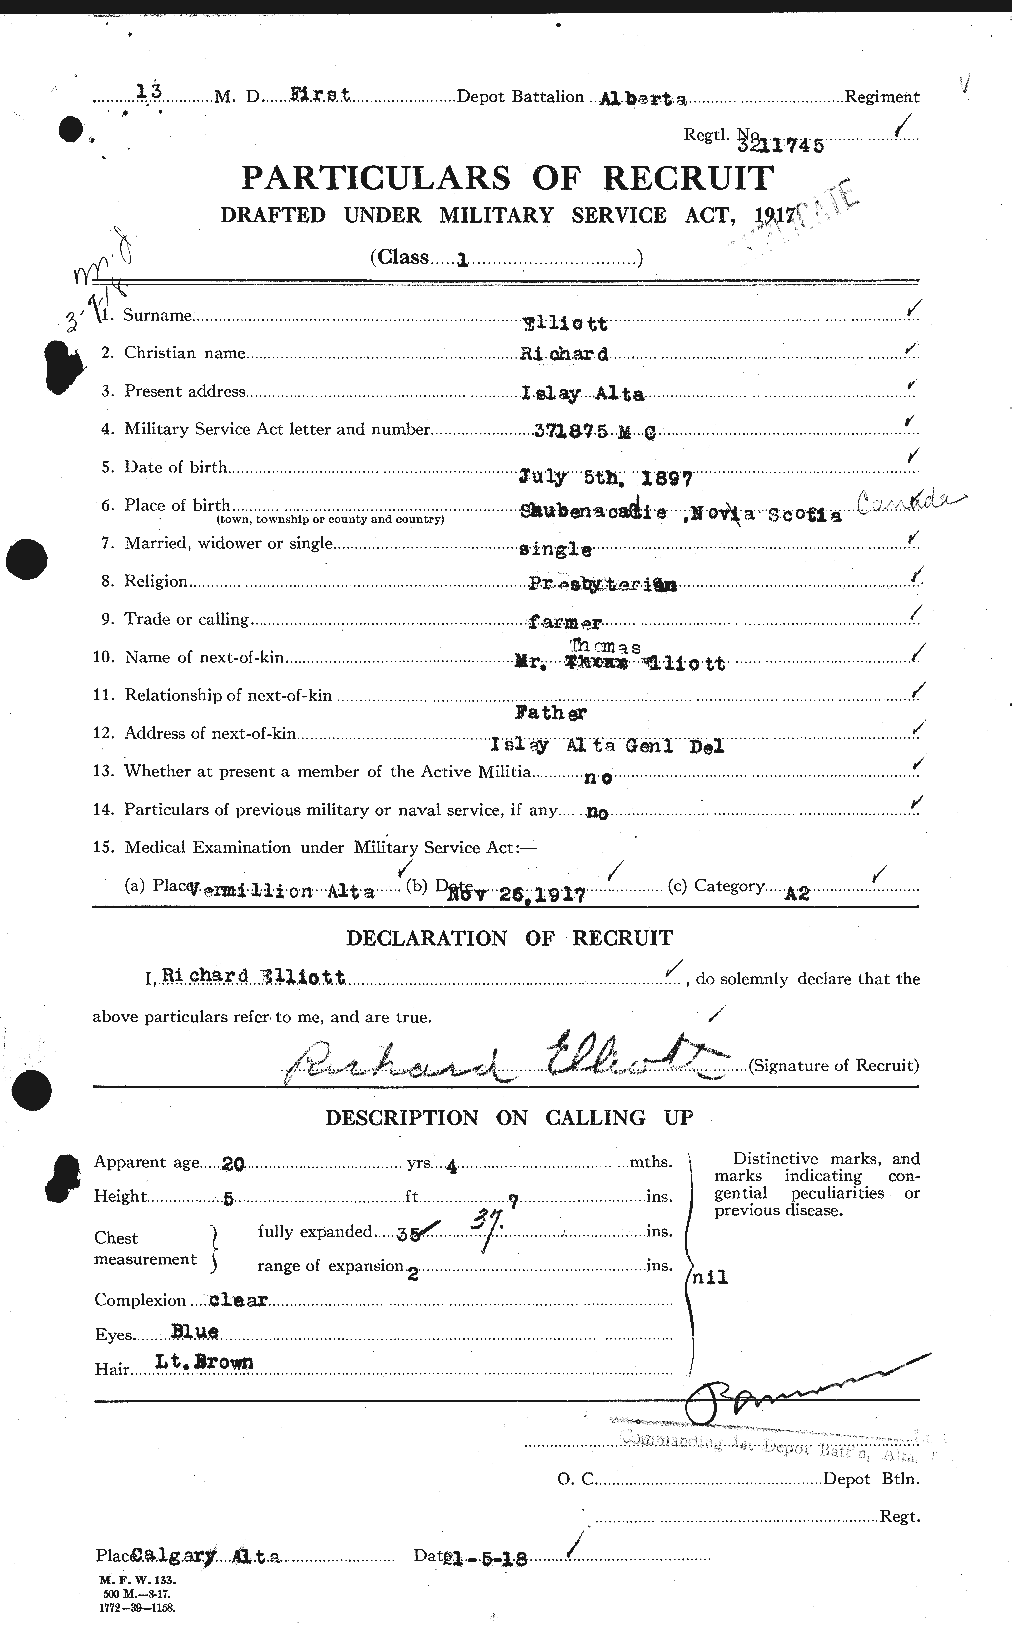 Personnel Records of the First World War - CEF 316053a